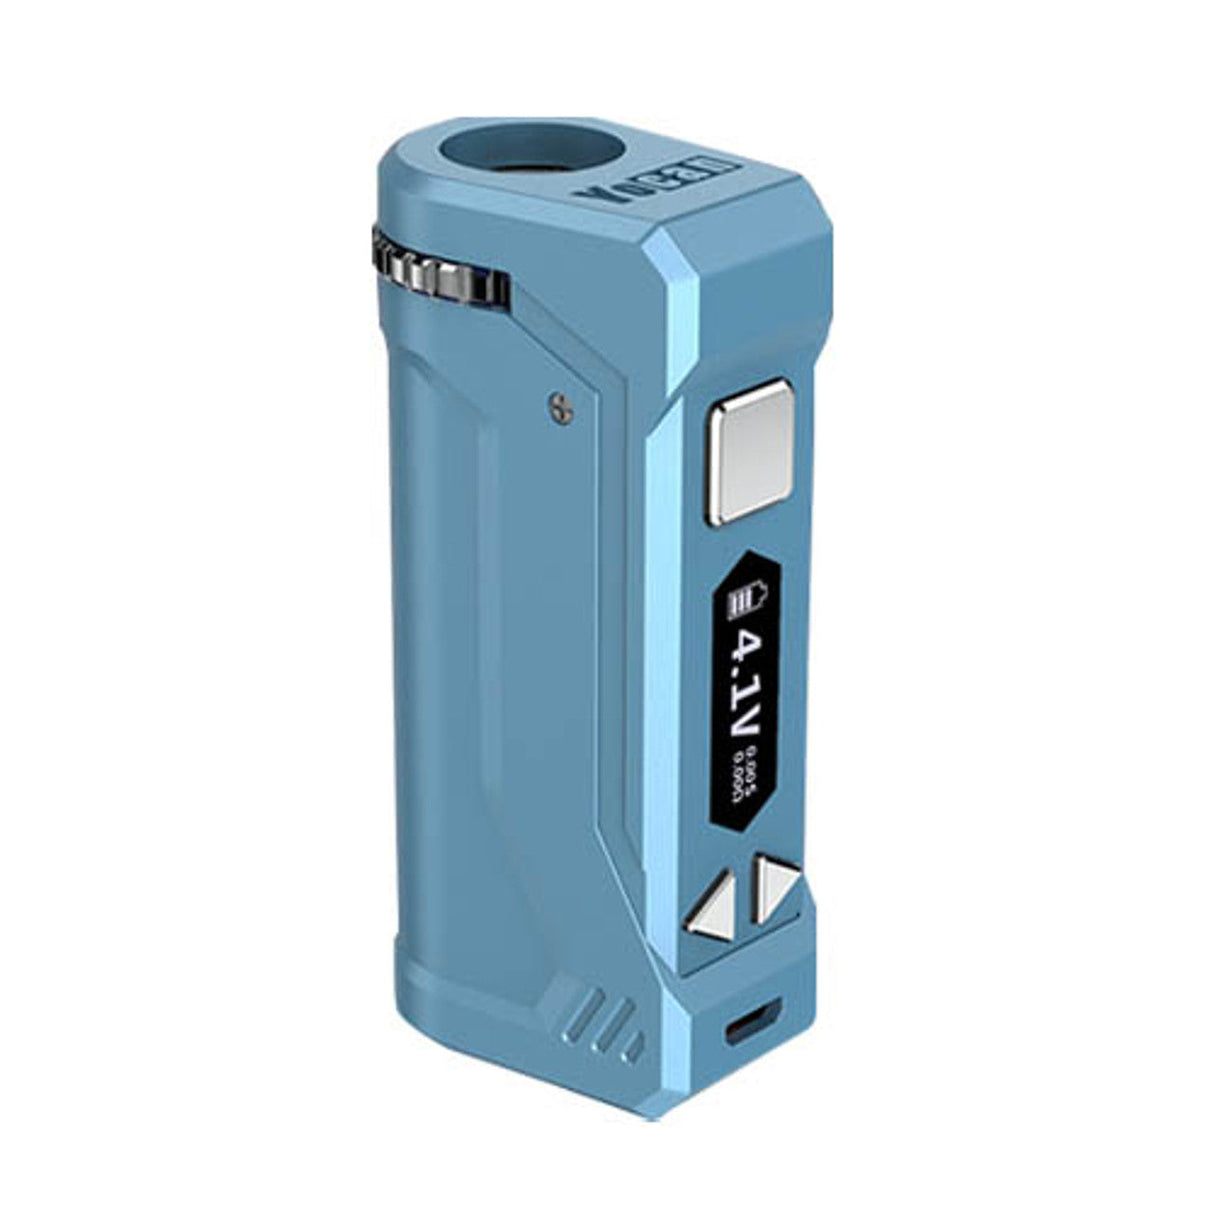 Yocan UNI PRO Box Mod in Airy Blue, 650mAh Battery, Portable for Vaporizers, Side View